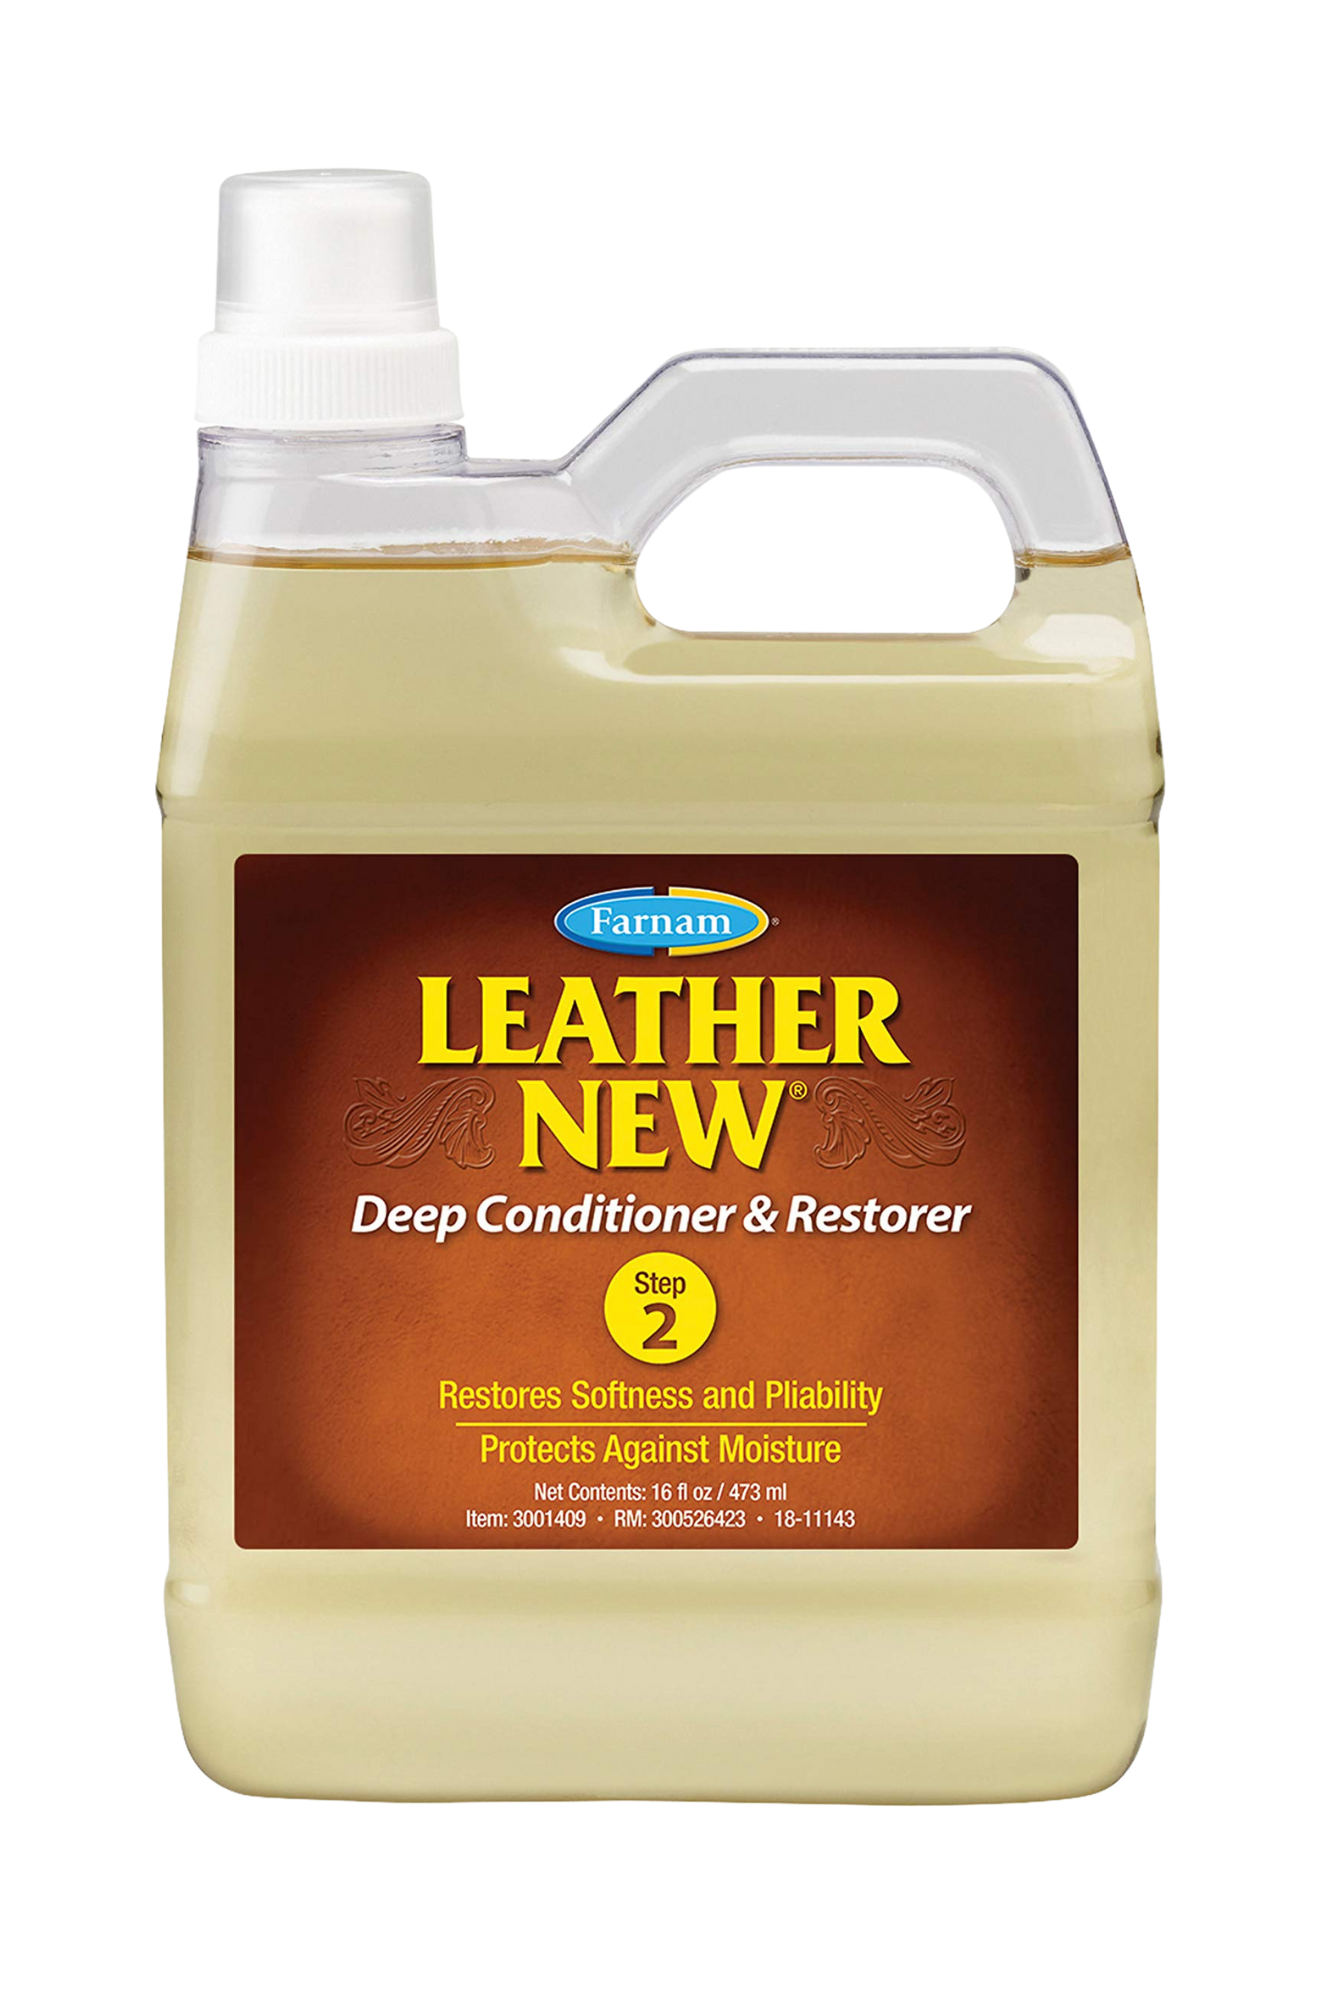 LEATHER NEW DEEP CONDITIONER AND RESTORER